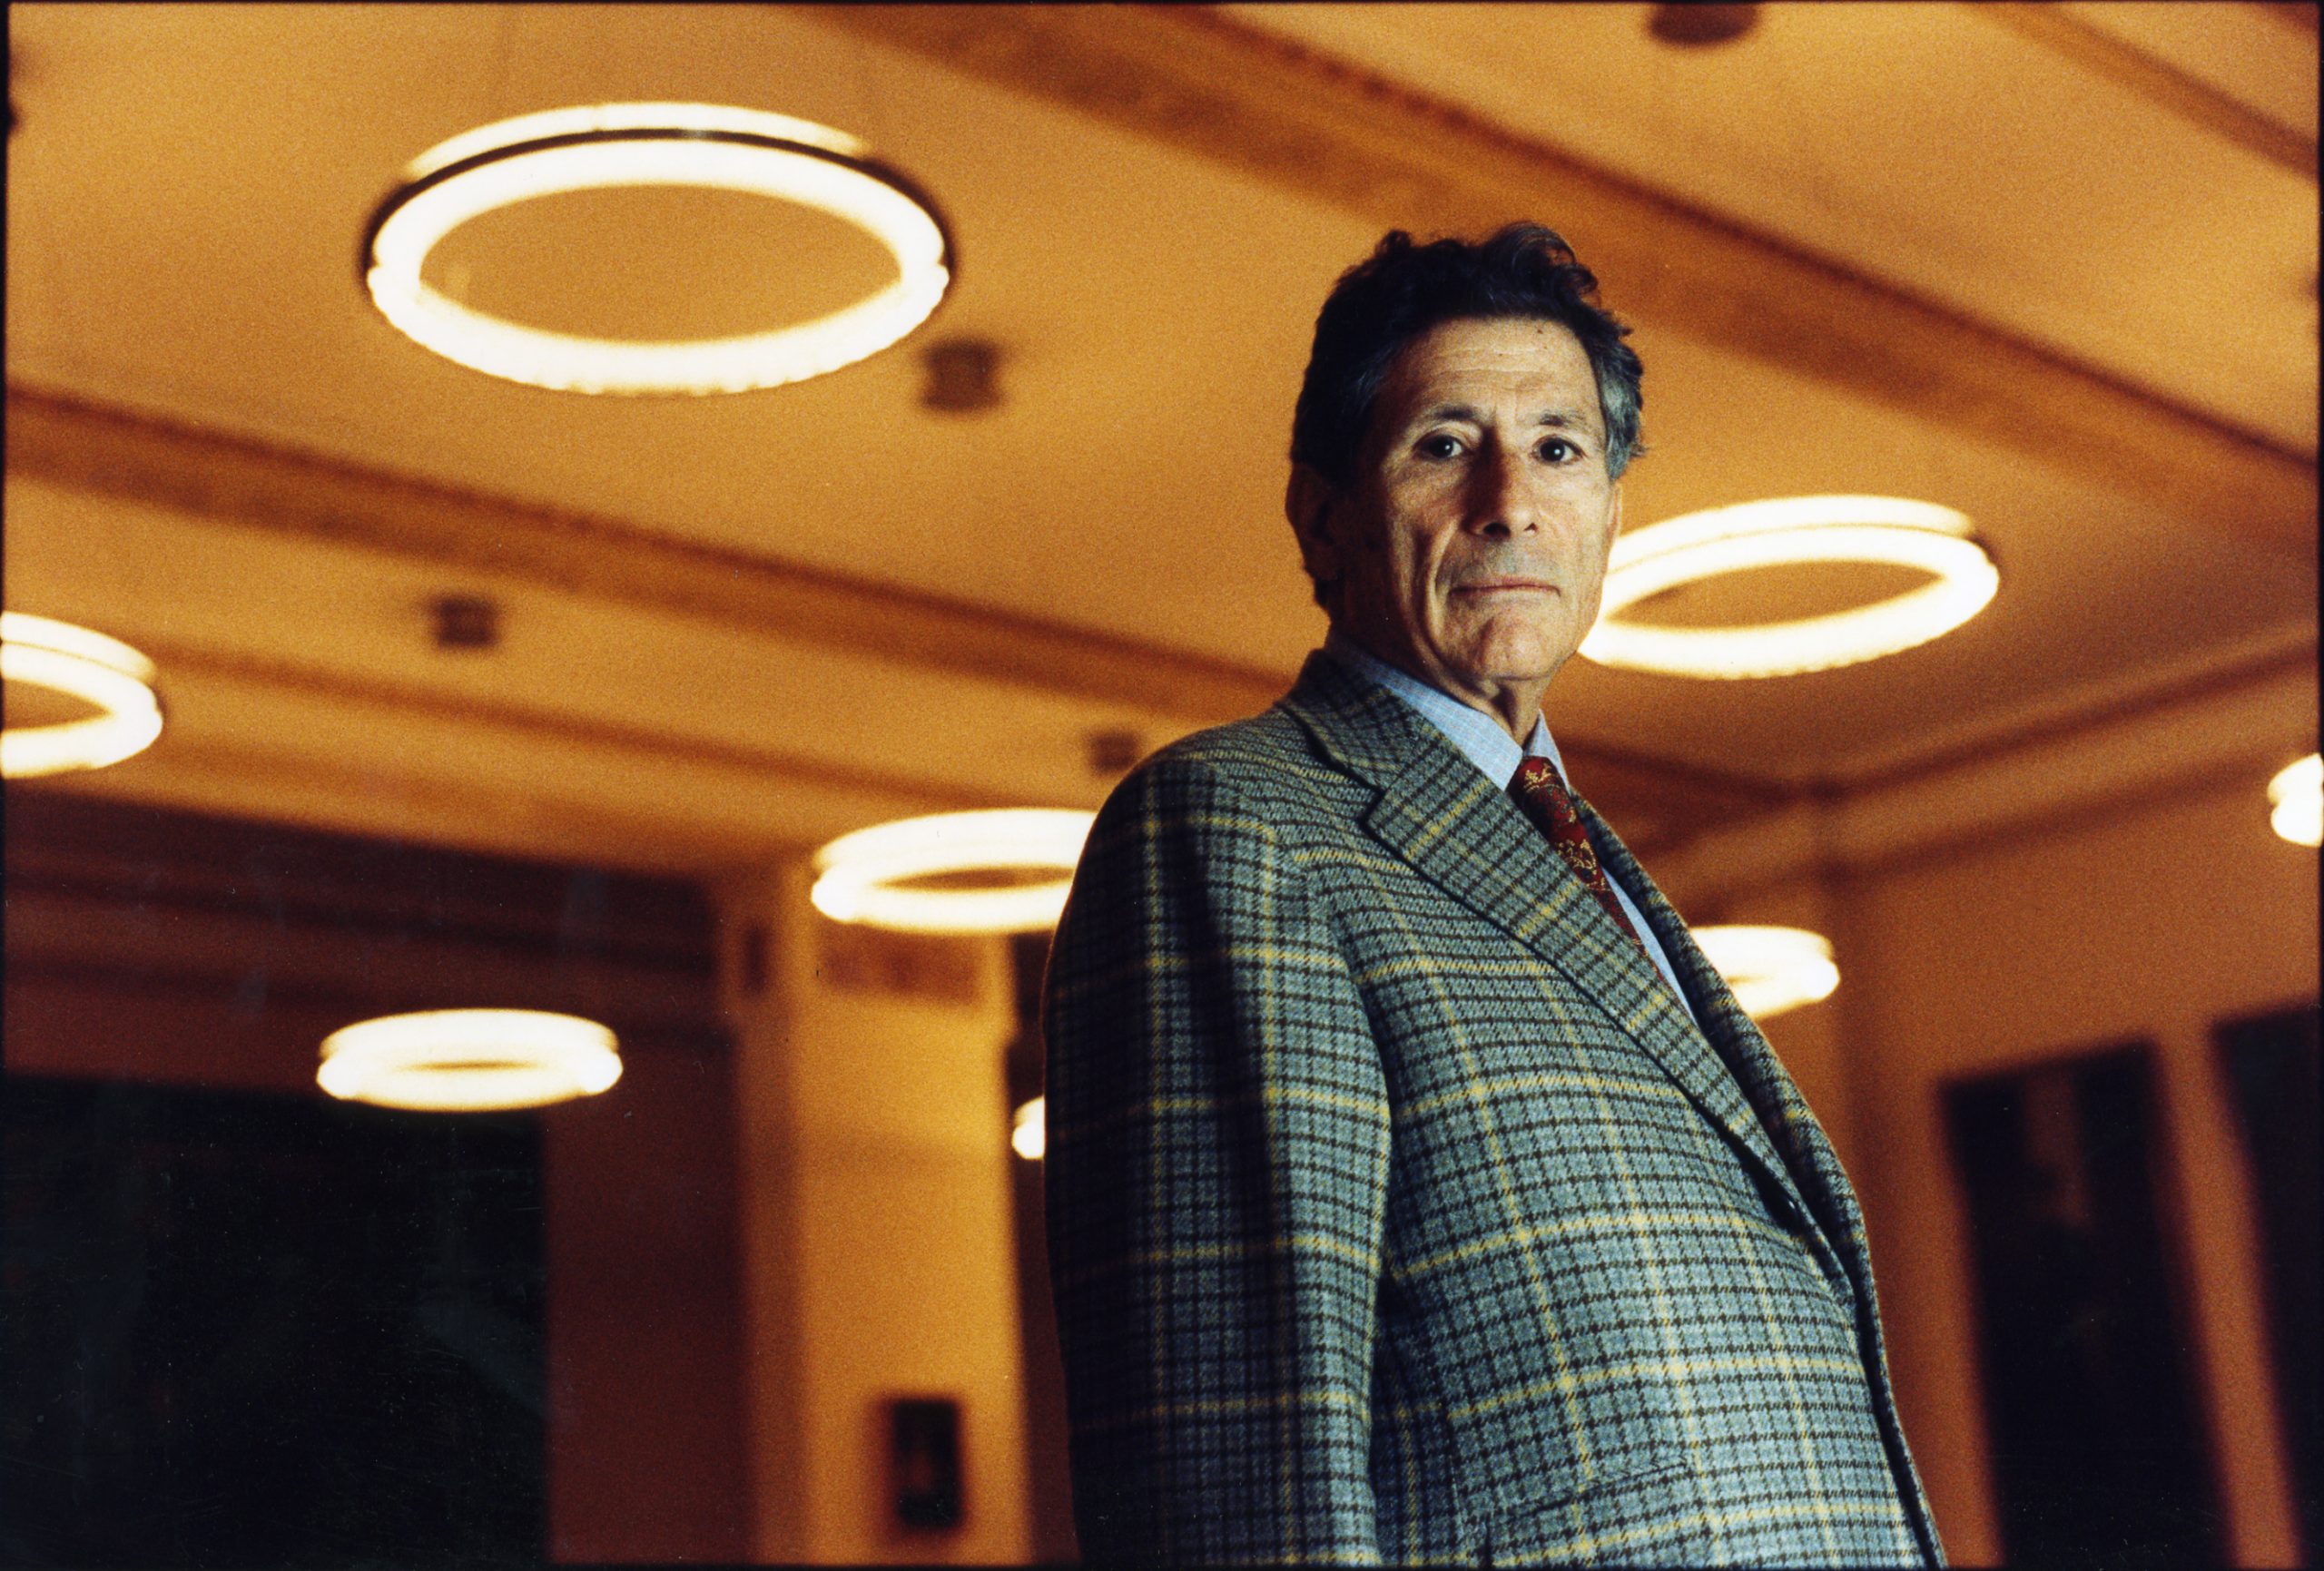 Spain. Portrait of the essayist, professor of literature and ex member of the Palestinian National Council Edward Said.